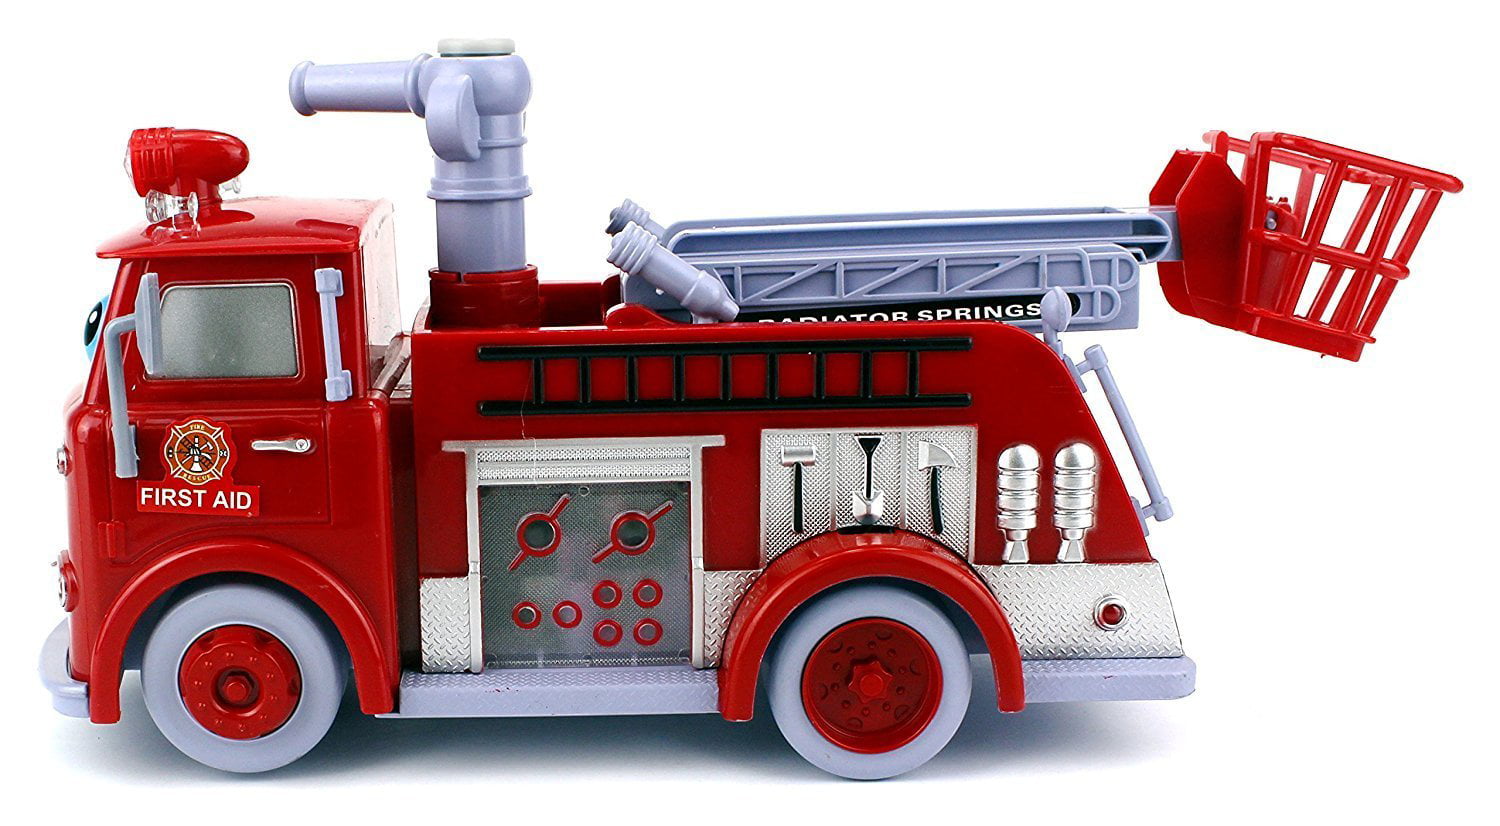 CUTE HAPPY FACE BUBBLE BLOWER FIRE TRUCK battery operated fire dept bubbles NEW 